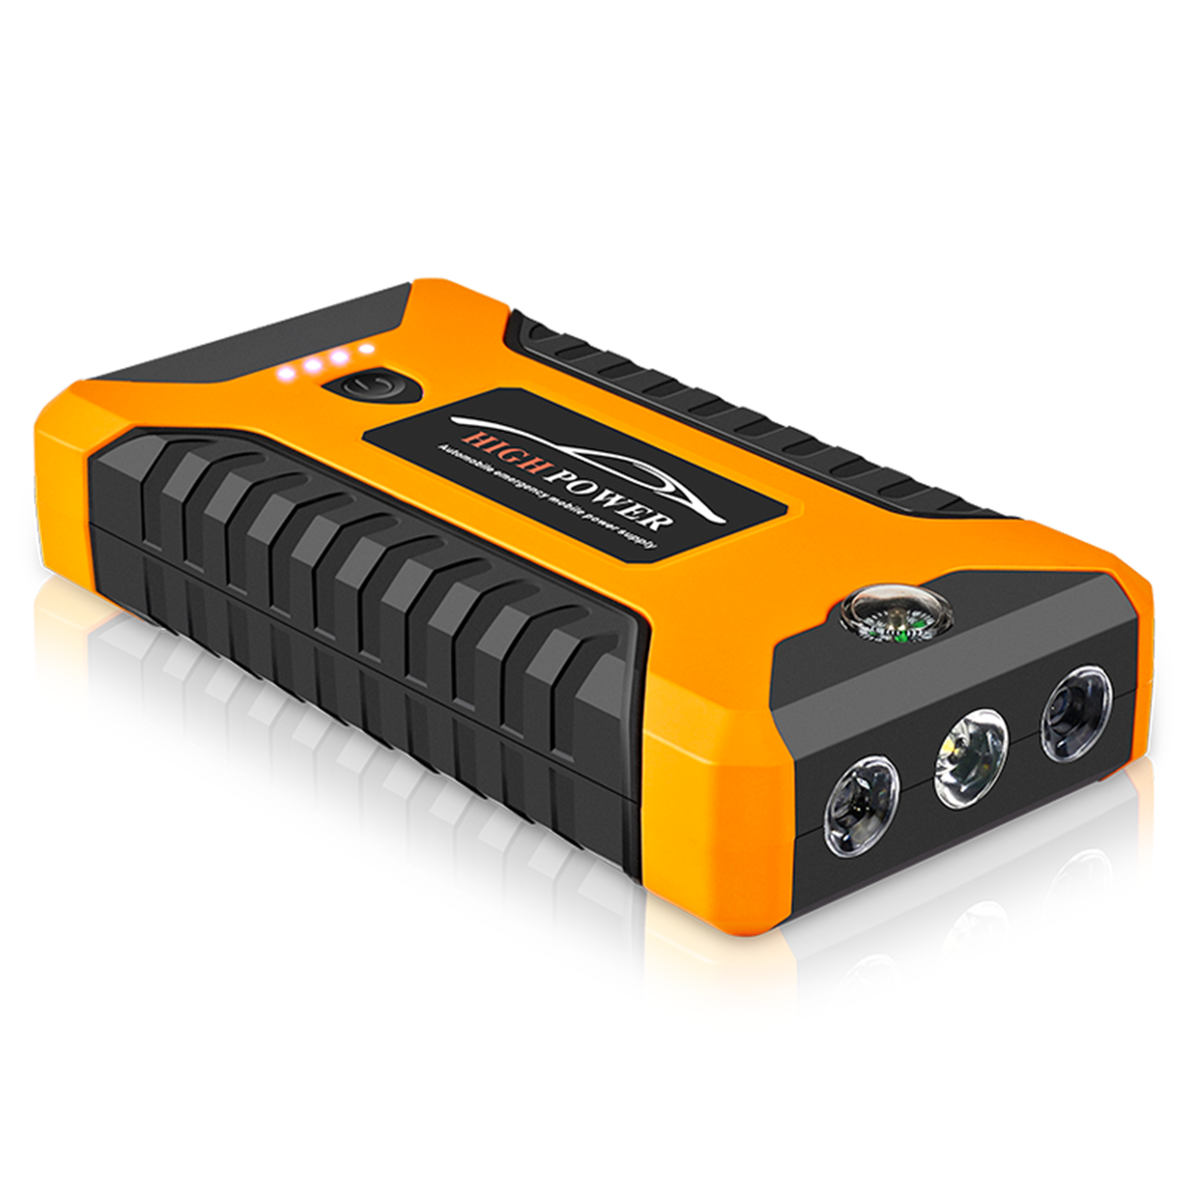 99800mah 600A Peak Car Jump Starter Lithium Battery with LED SOS Mode 12V Auto Battery Booster 2